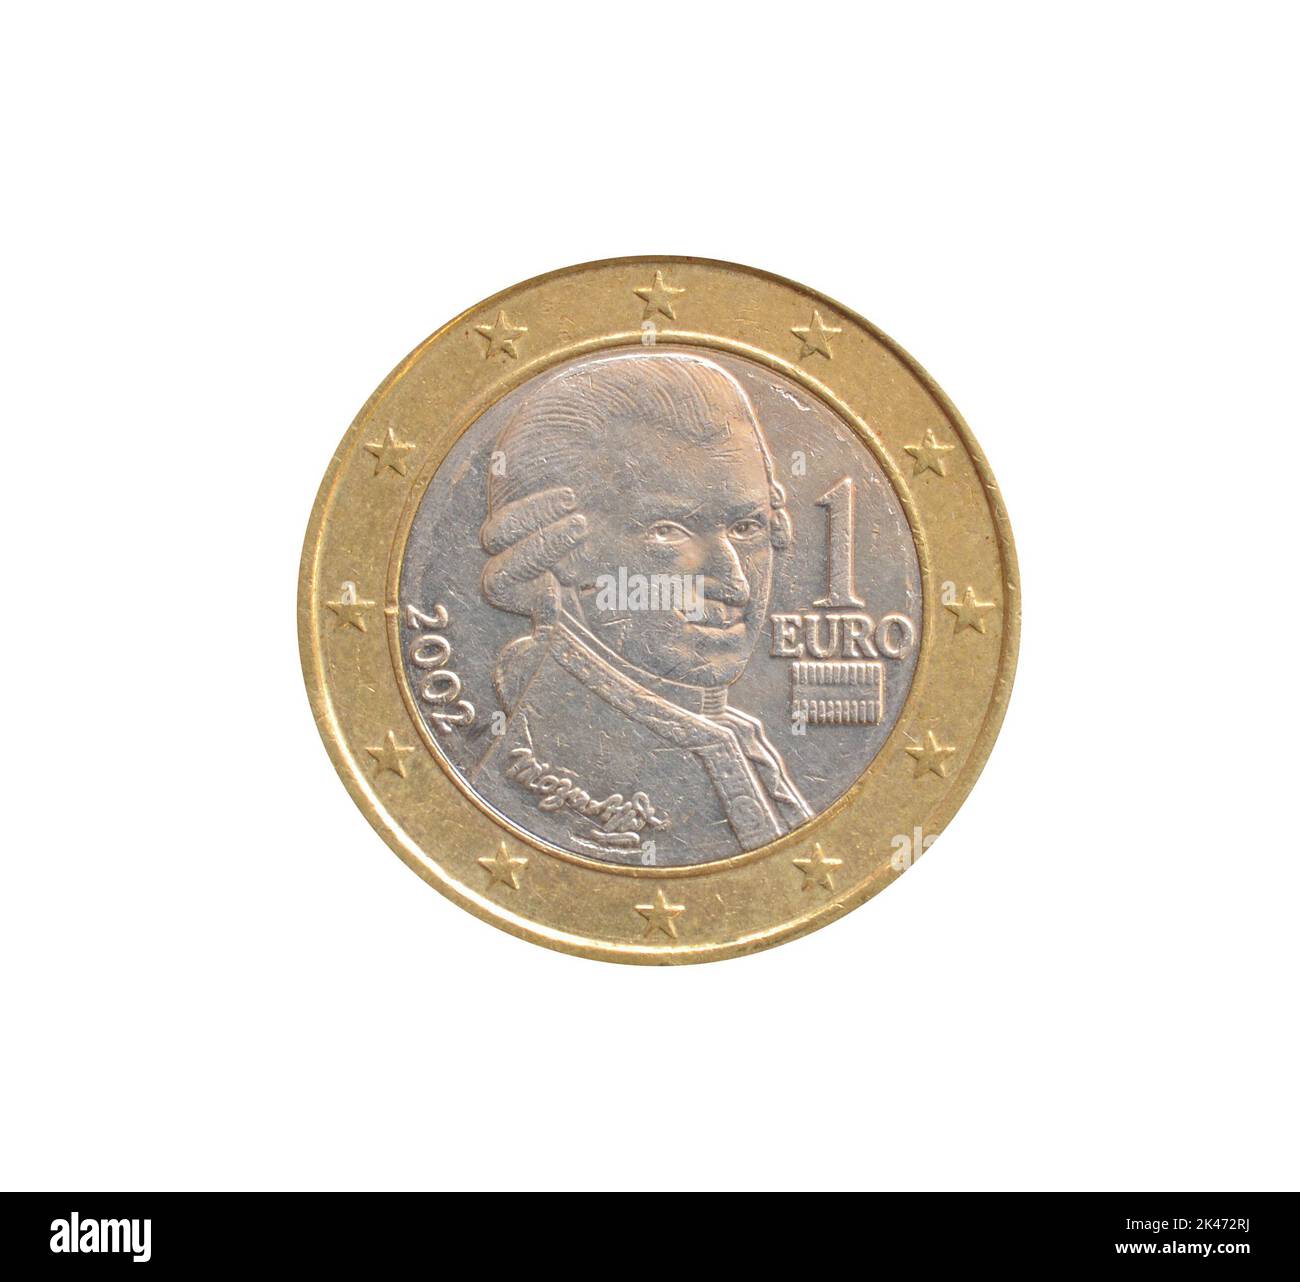 Reverse of One Euro coin made by Austria in 2002, that shows portrait of A portrait of Wolfgang Amadeus Mozart, the famous Austrian composer, Stock Photo